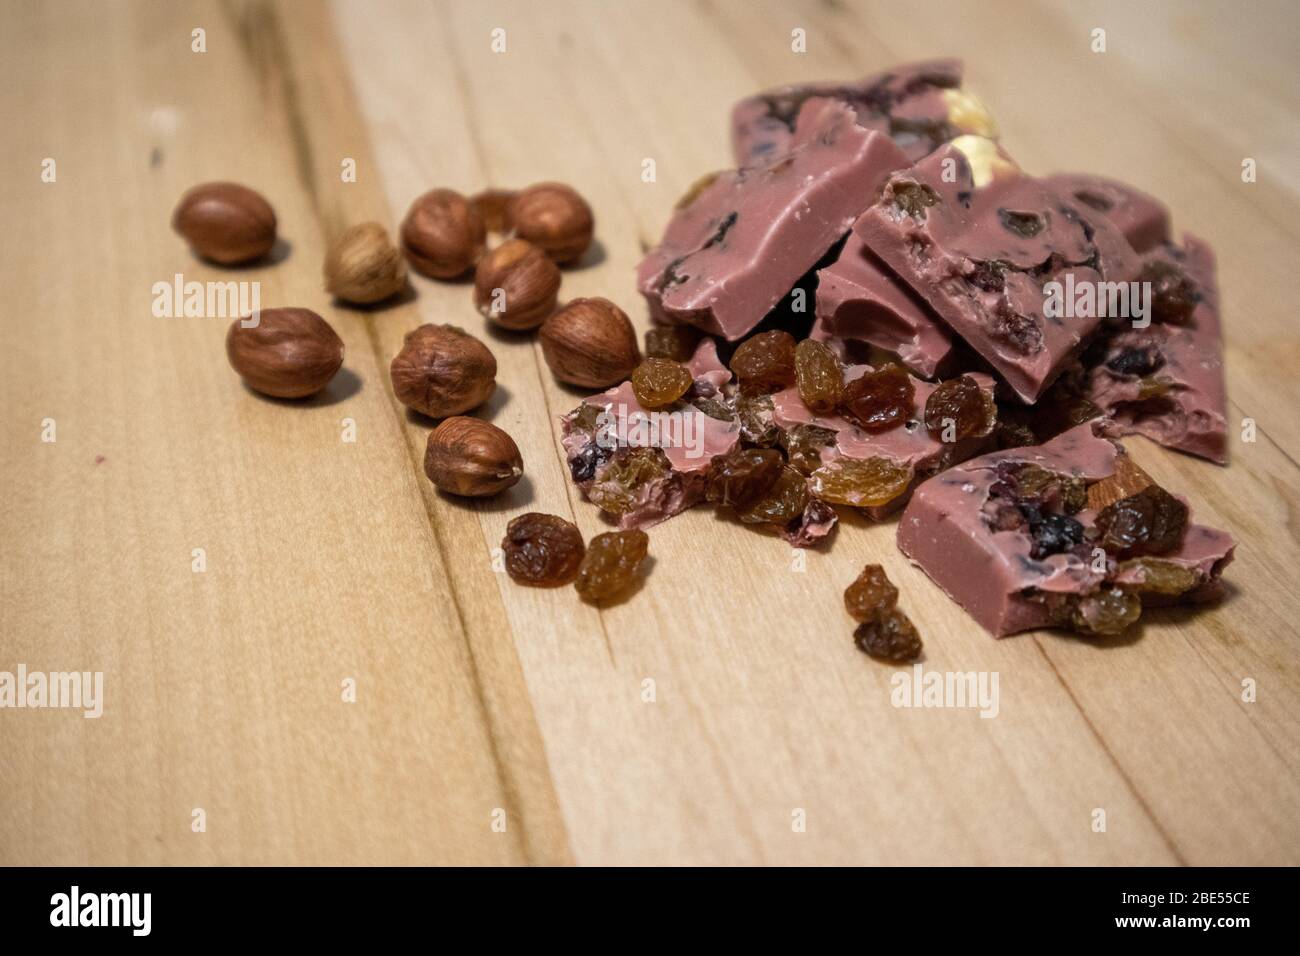 https://c8.alamy.com/comp/2BE55CE/pink-chocolate-chocolate-with-nuts-raisins-and-cranberries-2BE55CE.jpg